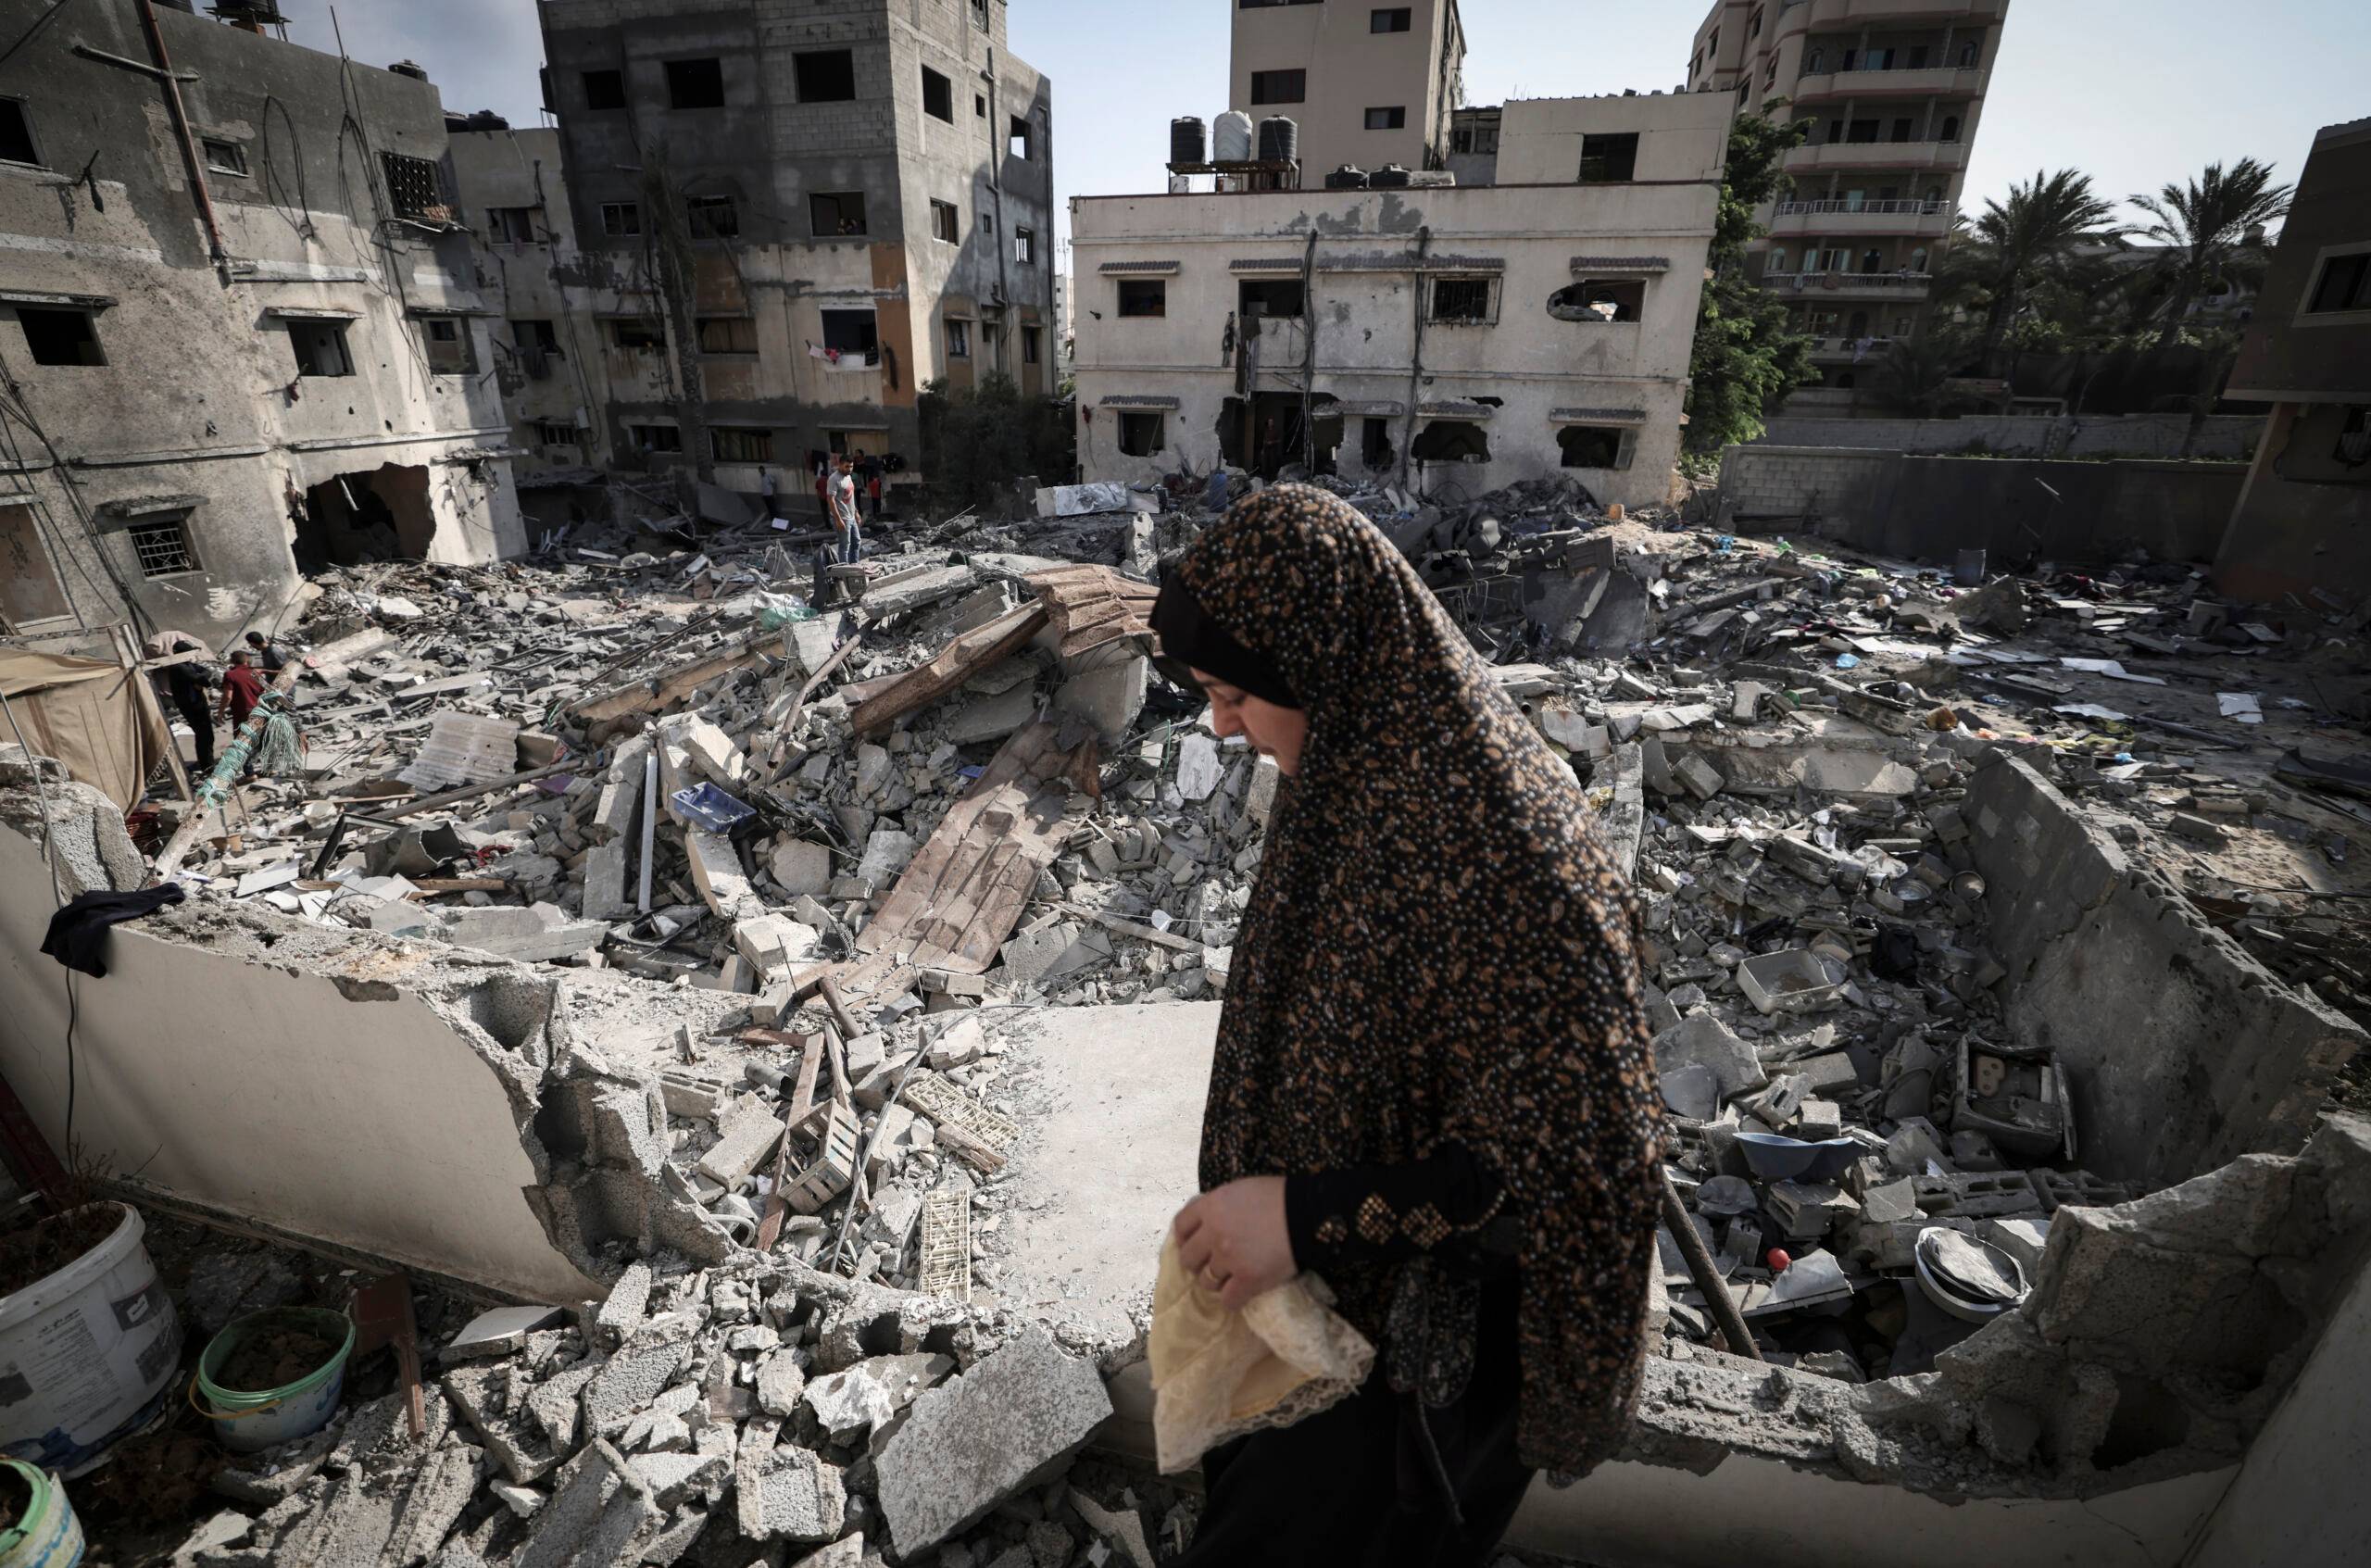 A Palestinian woman checks the damage as she walks through rubble in front of her home in Gaza city early on August 8, 2022, following a cease fire between Israel and Palestinian militants. - Israel agreed last night to an Egyptian proposed truce with in Gaza with Islamic Jihad after three days of intense conflict. (Photo by Mahmud HAMS / AFP)